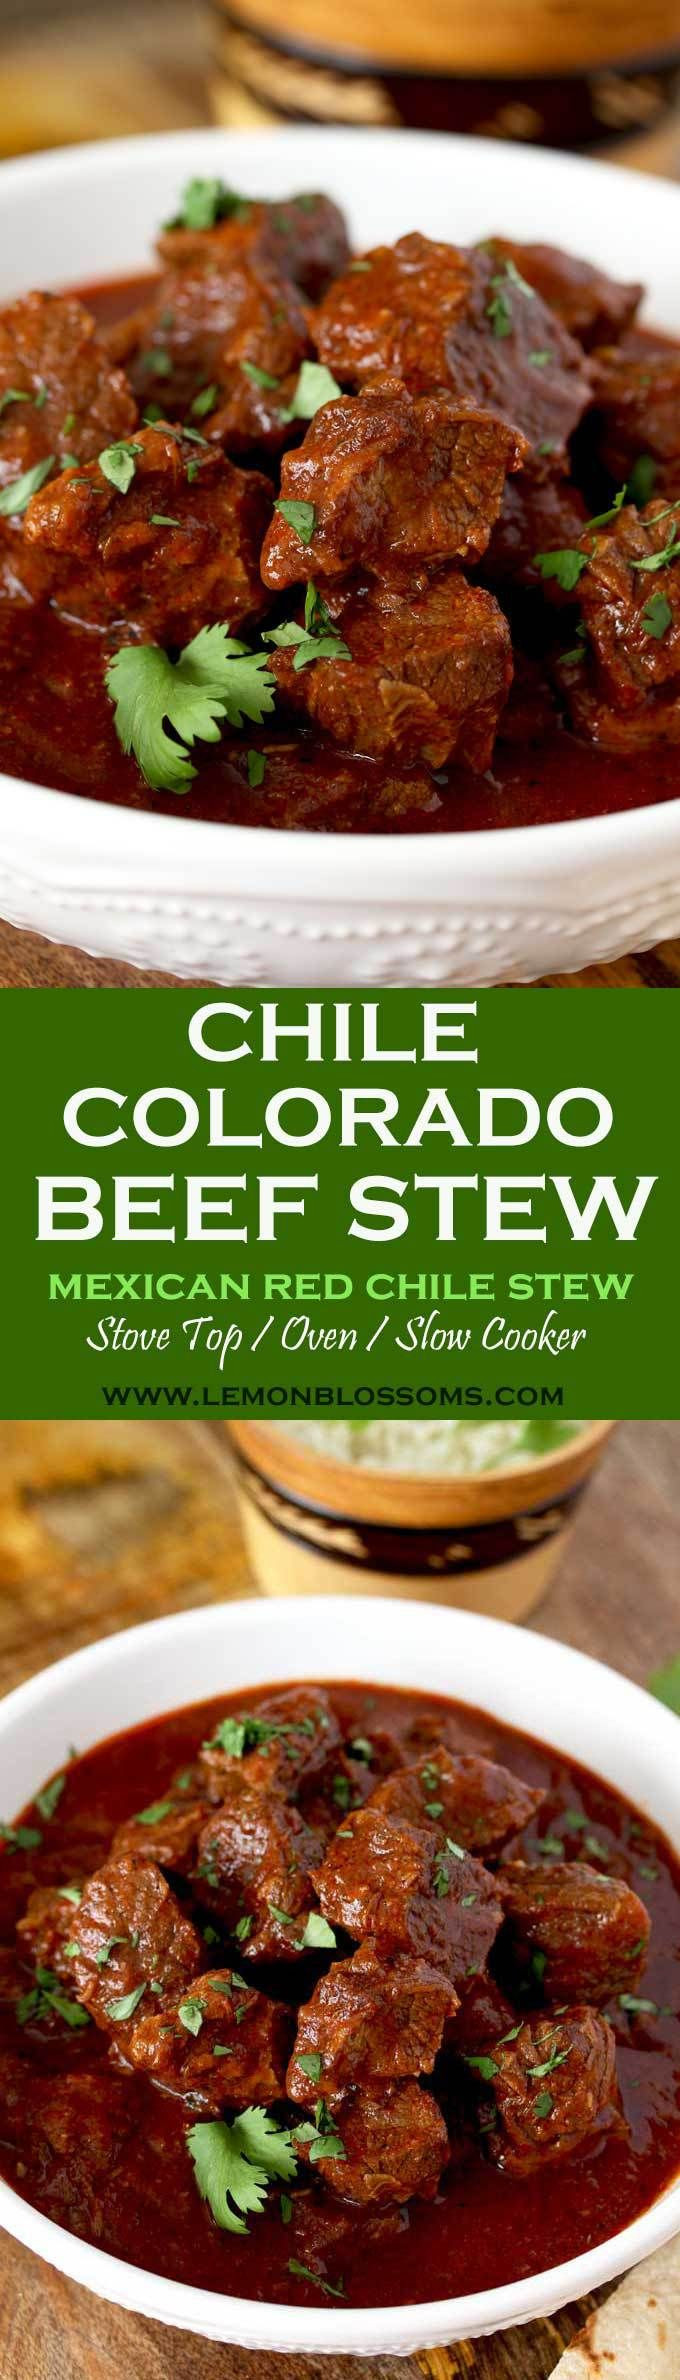 Good Burritos Don'T Fall Apart
 This rich and hearty Chile Colorado Beef Stew is lip